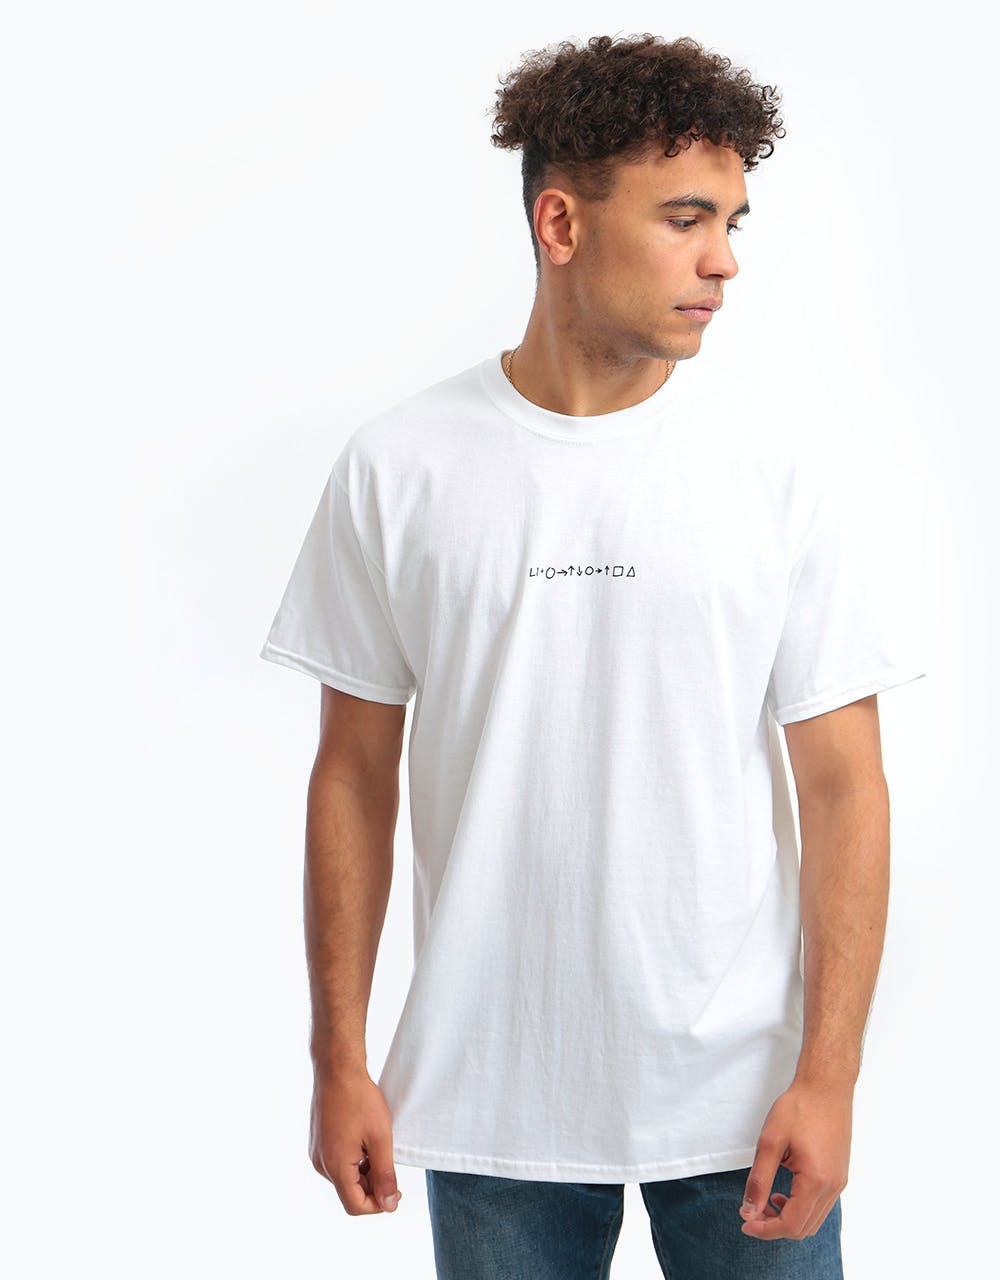 Route One Unlock Everything T-Shirt - White